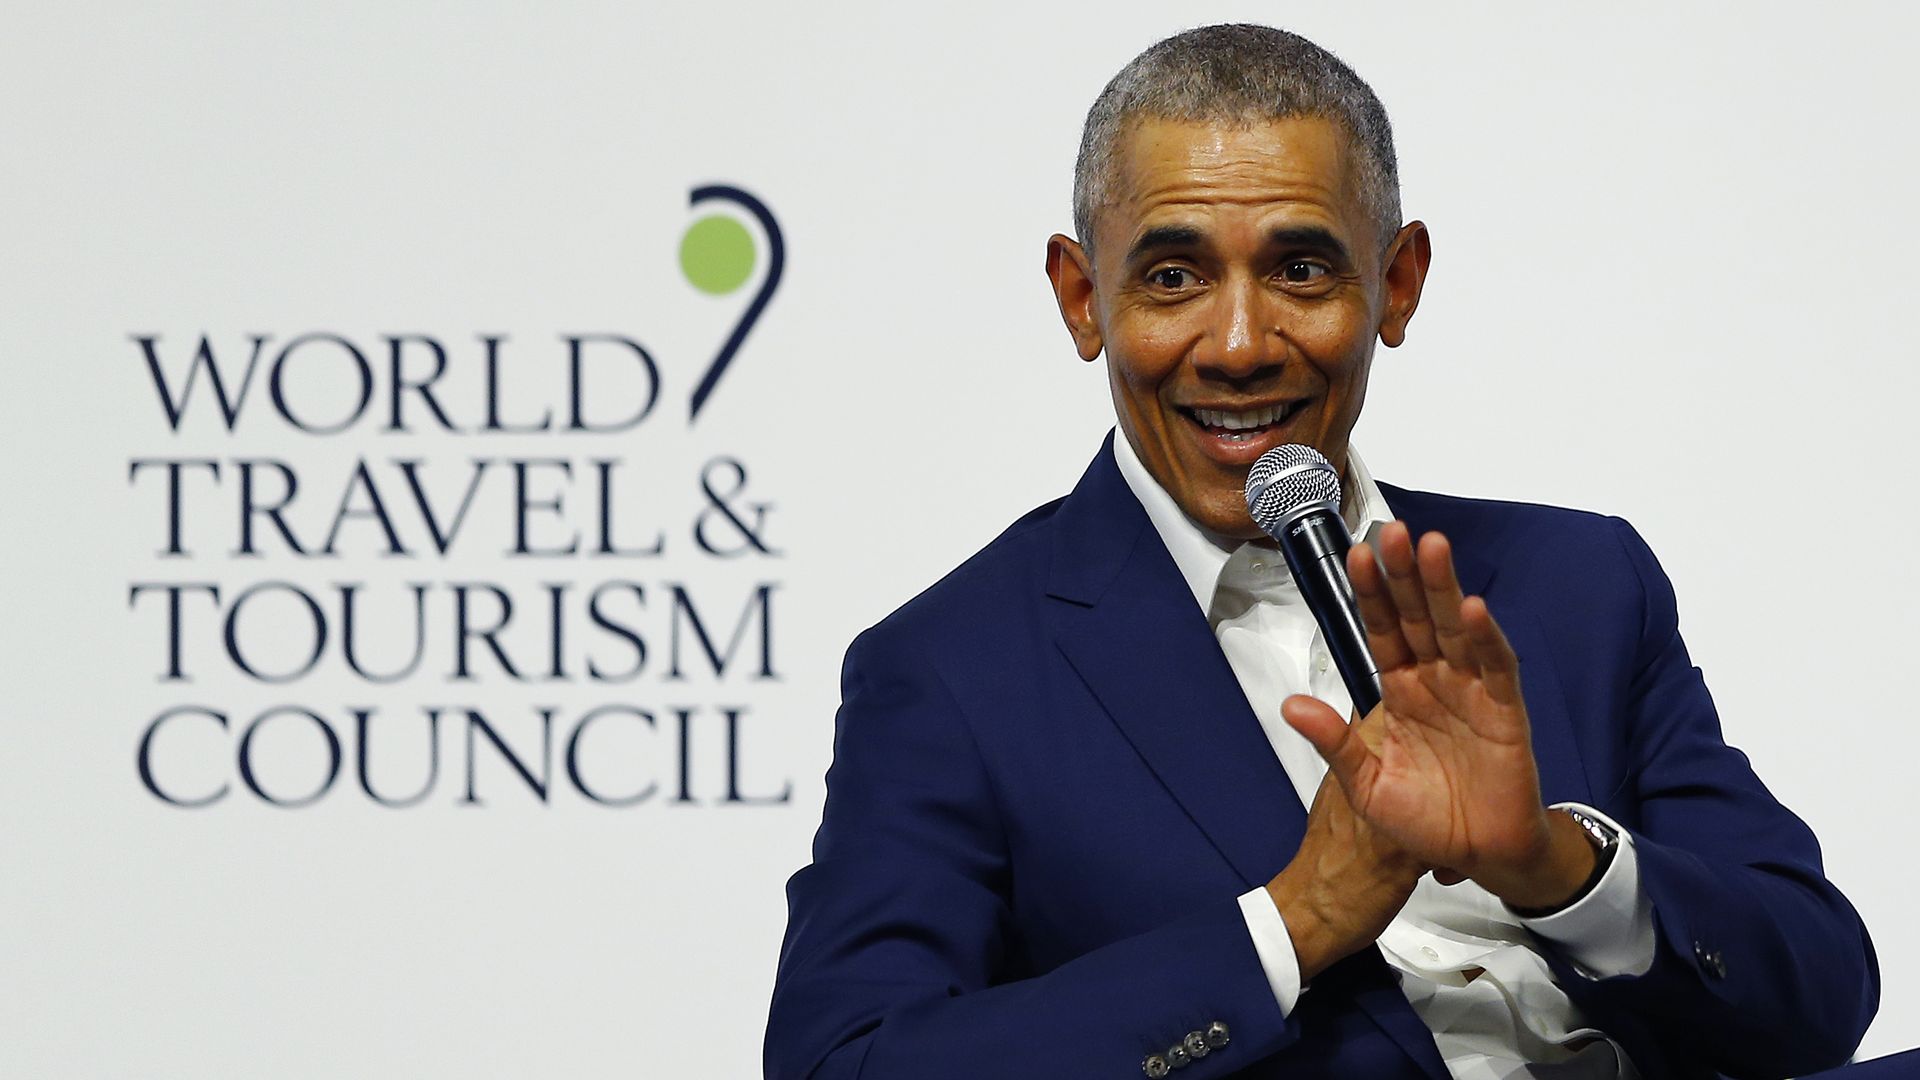 In this image, Obama sits in a chair and waves to the audience while smiling and speaking into a microphone.